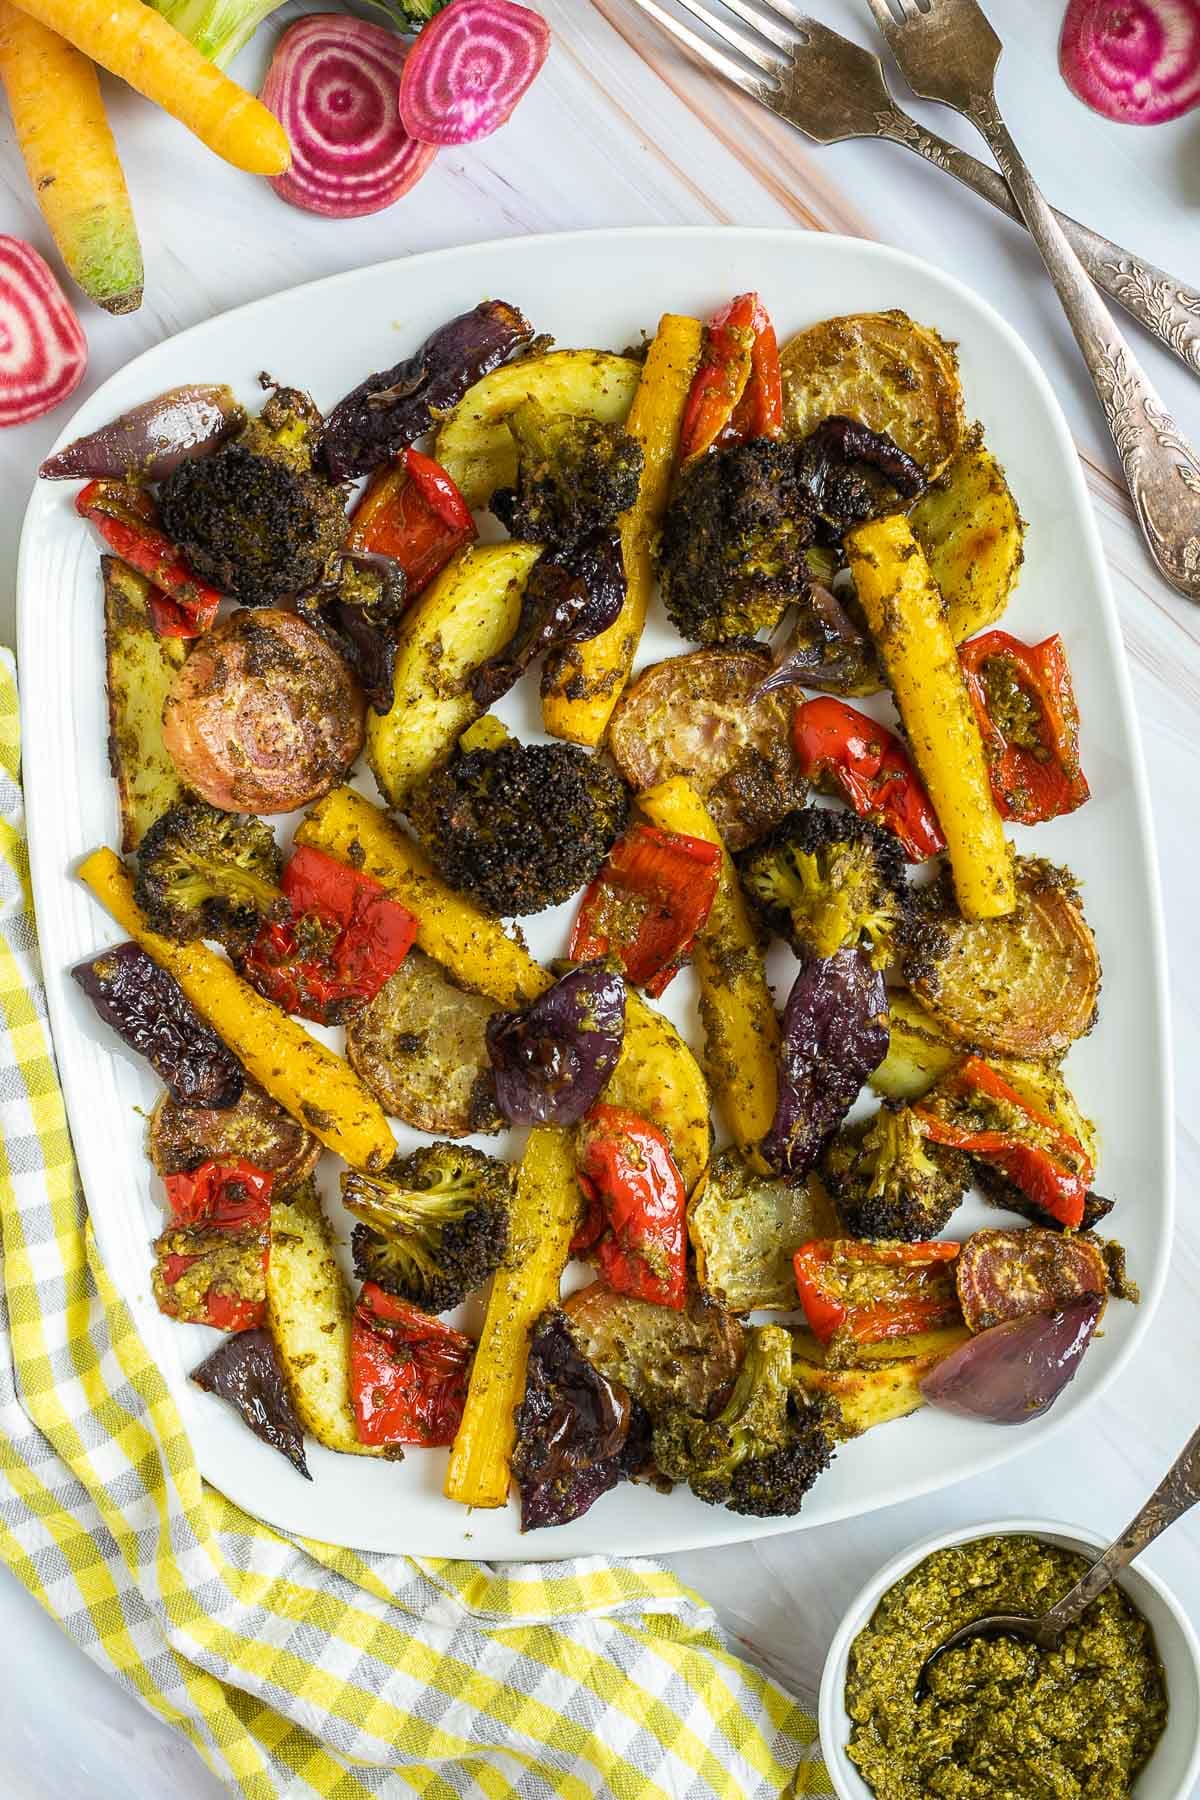 Large white serving plate with vibrant vegetables like broccoli, yellow carrots, red pepper, red onion, pink beet and potato slightly charred around the edges covered in a bit of pesto sauce. 